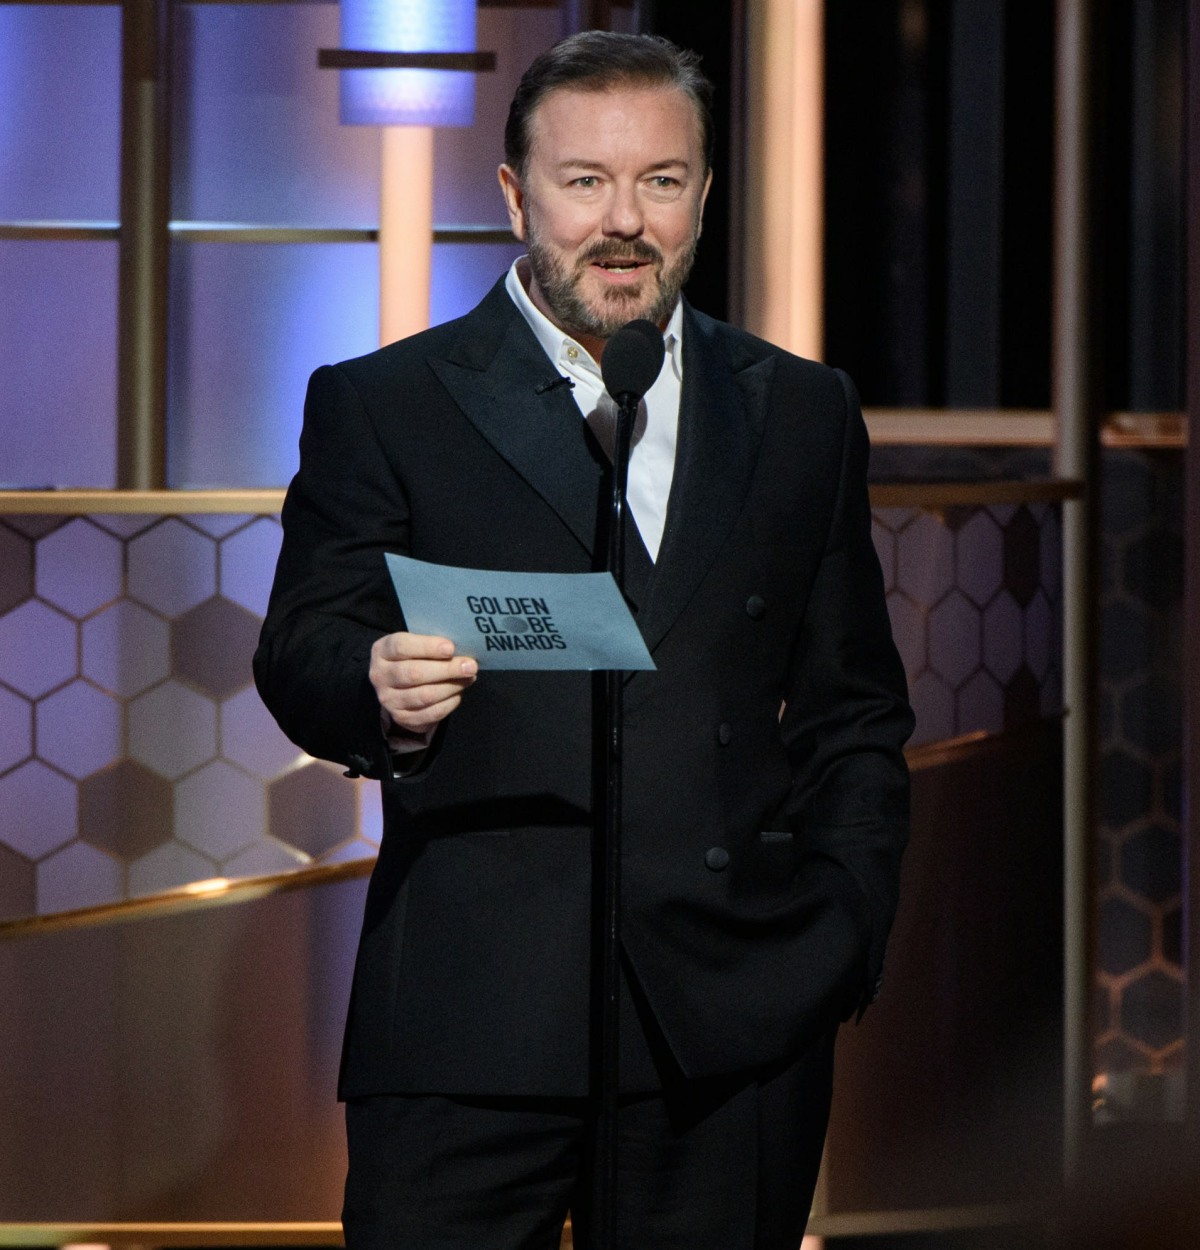 Ricky Gervais hosts the 77th Annual Golden Globe Awards at the Beverly Hilton in Beverly Hills, CA on Sunday, January 5, 2020.